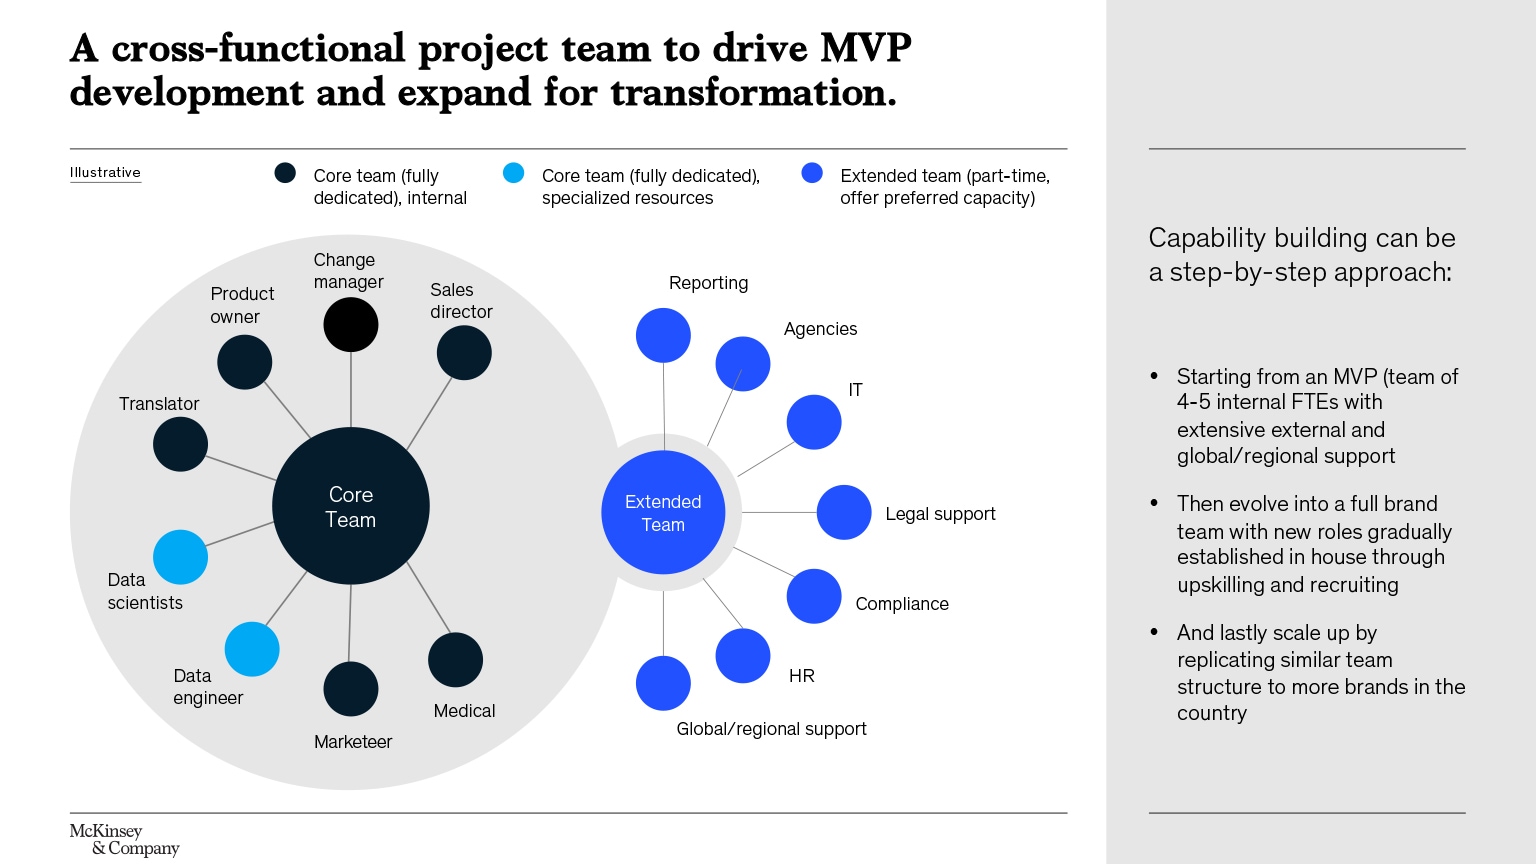 A cross-functional project team to drive MVP development